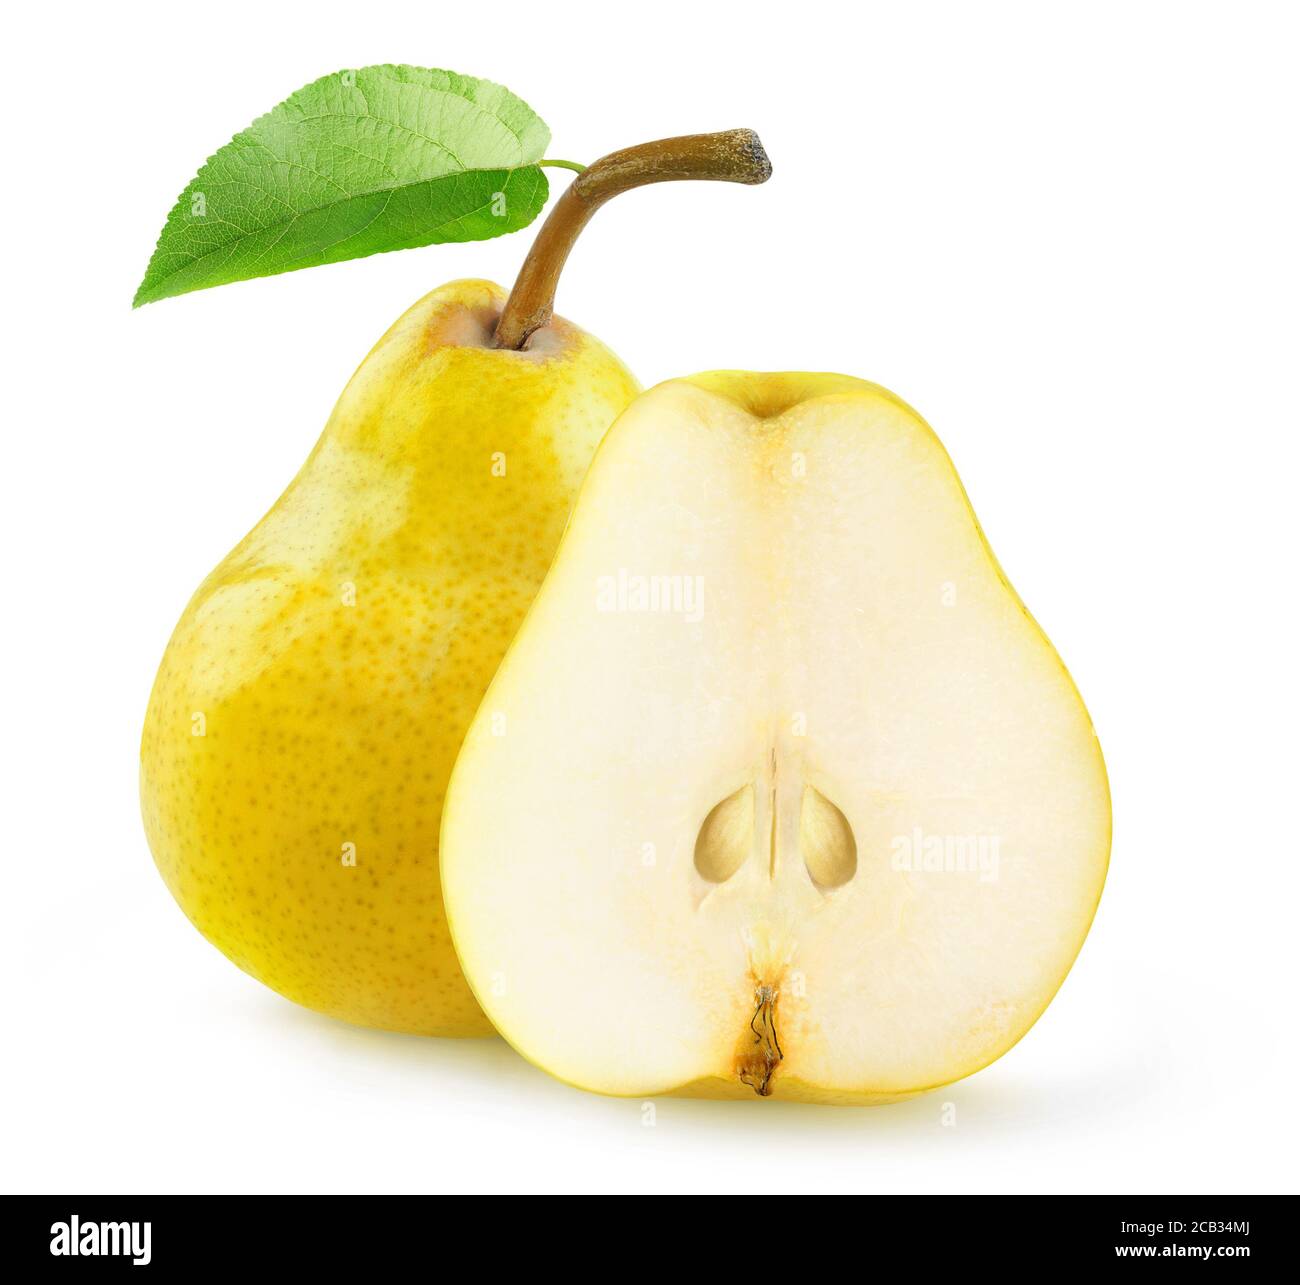 Isolated cut pears. One whole yellow pear with bent stem and leaf and a half isolated on white background Stock Photo